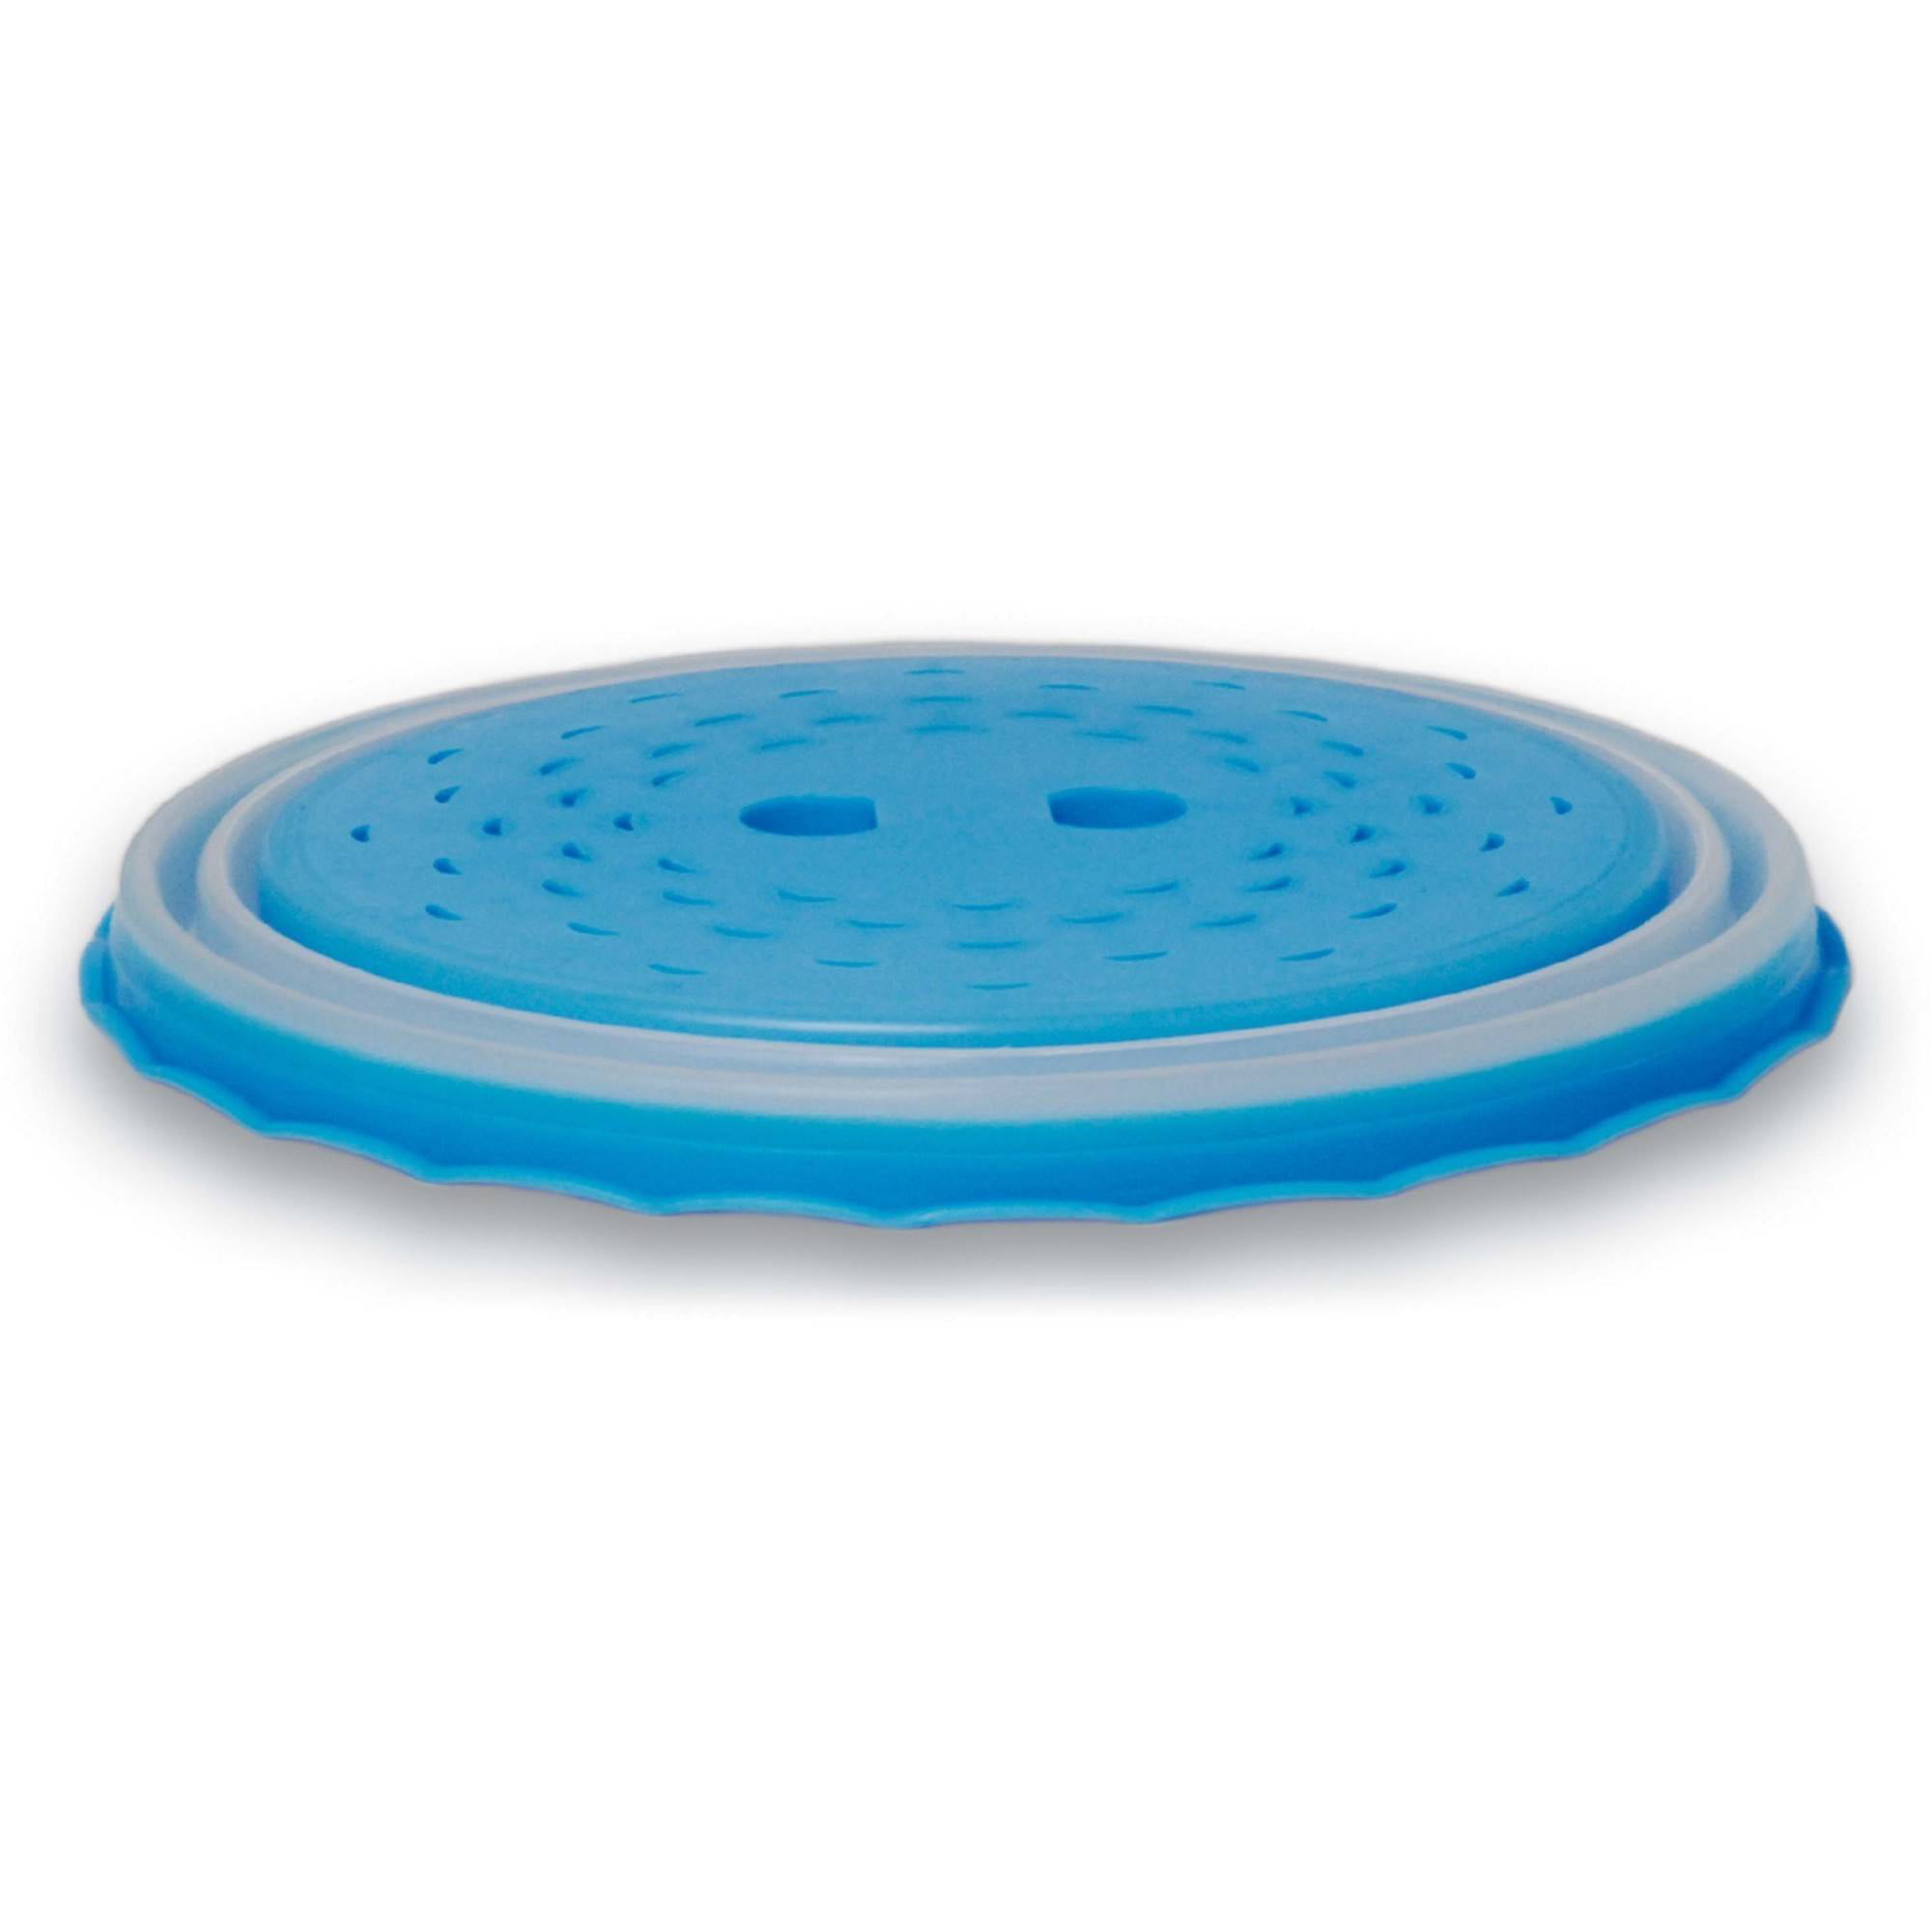 Handy Gourmet Collapsible Microwave Shield - (Jb5272) - Blue